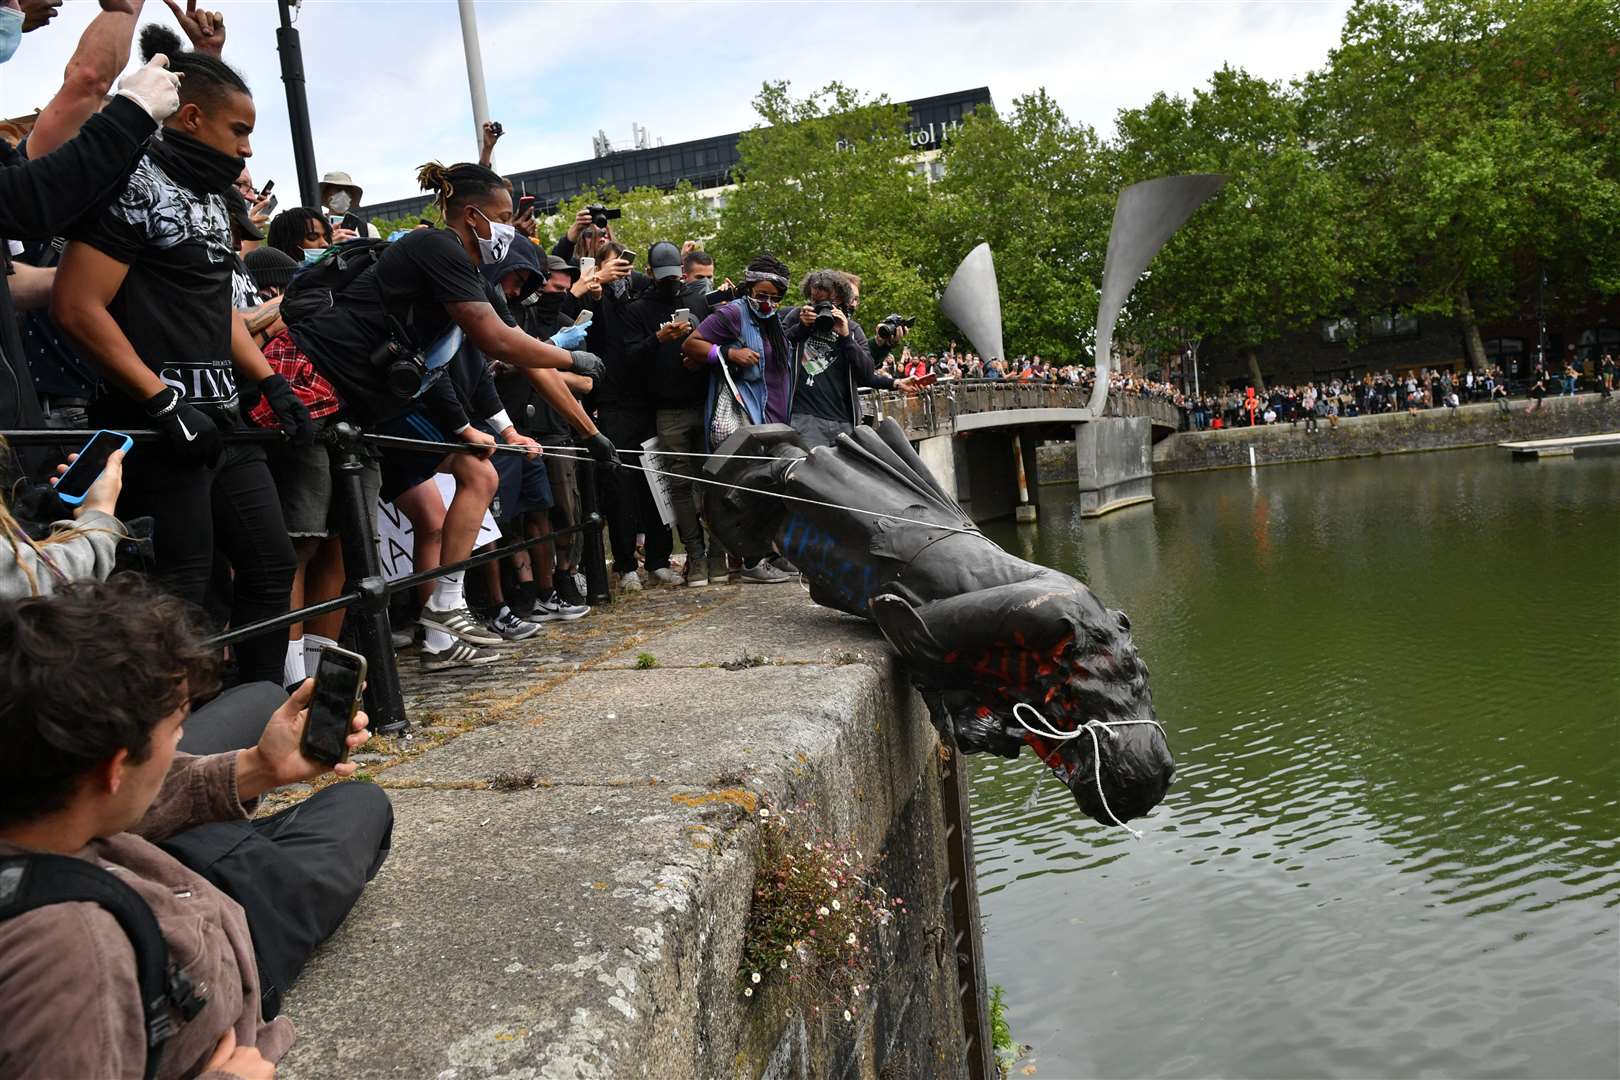 The statue of Edward Colston being thrown into Bristol Harbour during Black Lives Matter protests in June 2020 (Ben Birchall/PA)